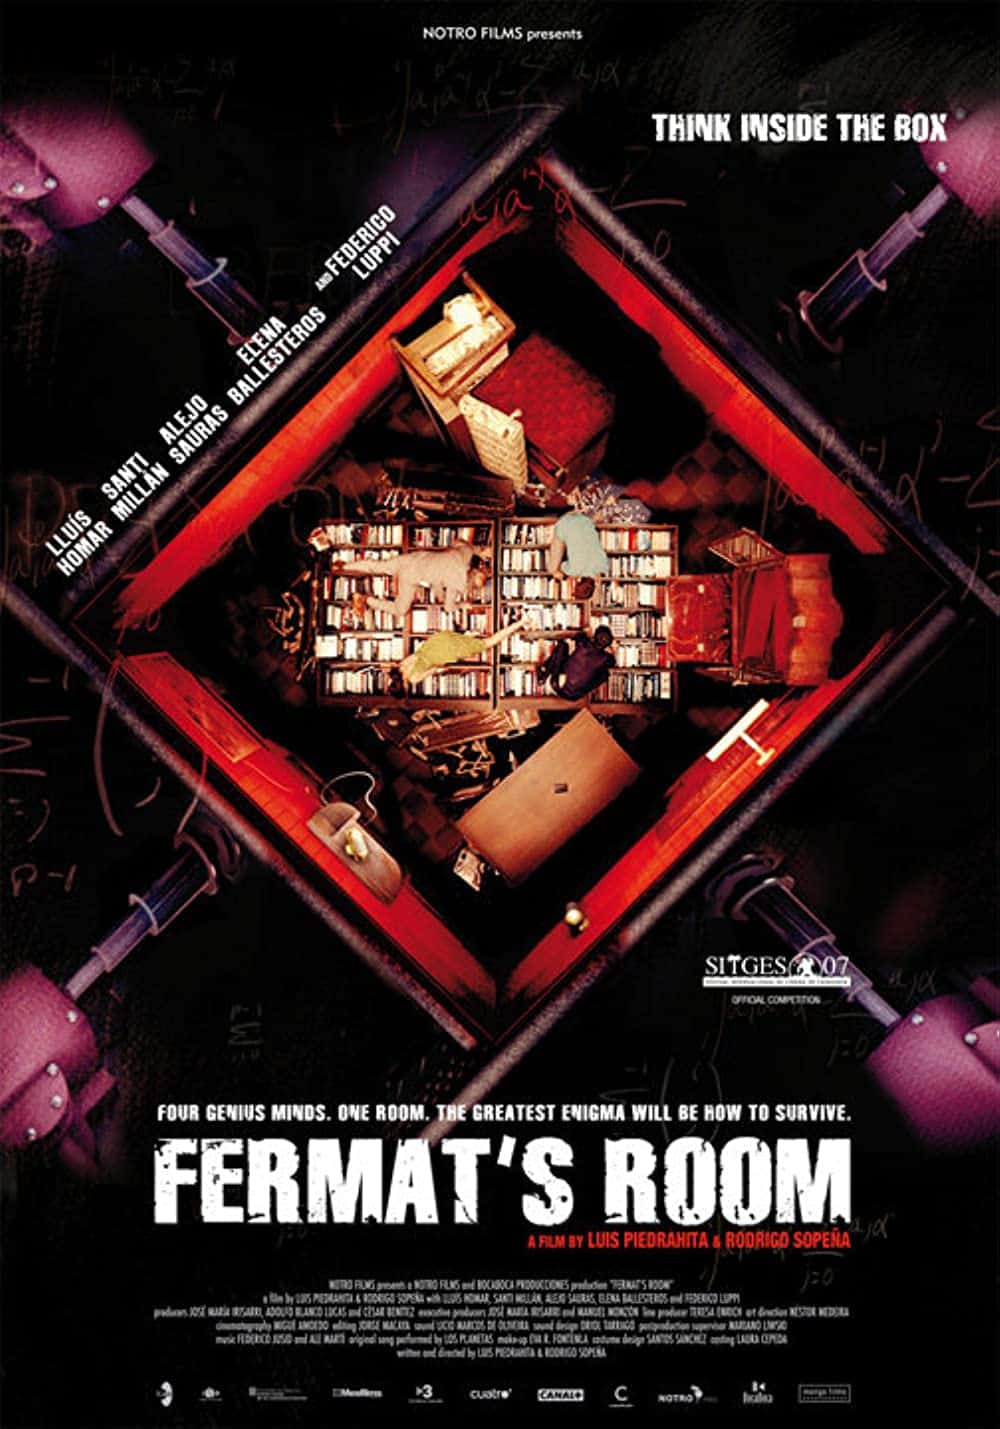 Fermat's Room (2007) Best Math Movies to Add in Your Watchlist